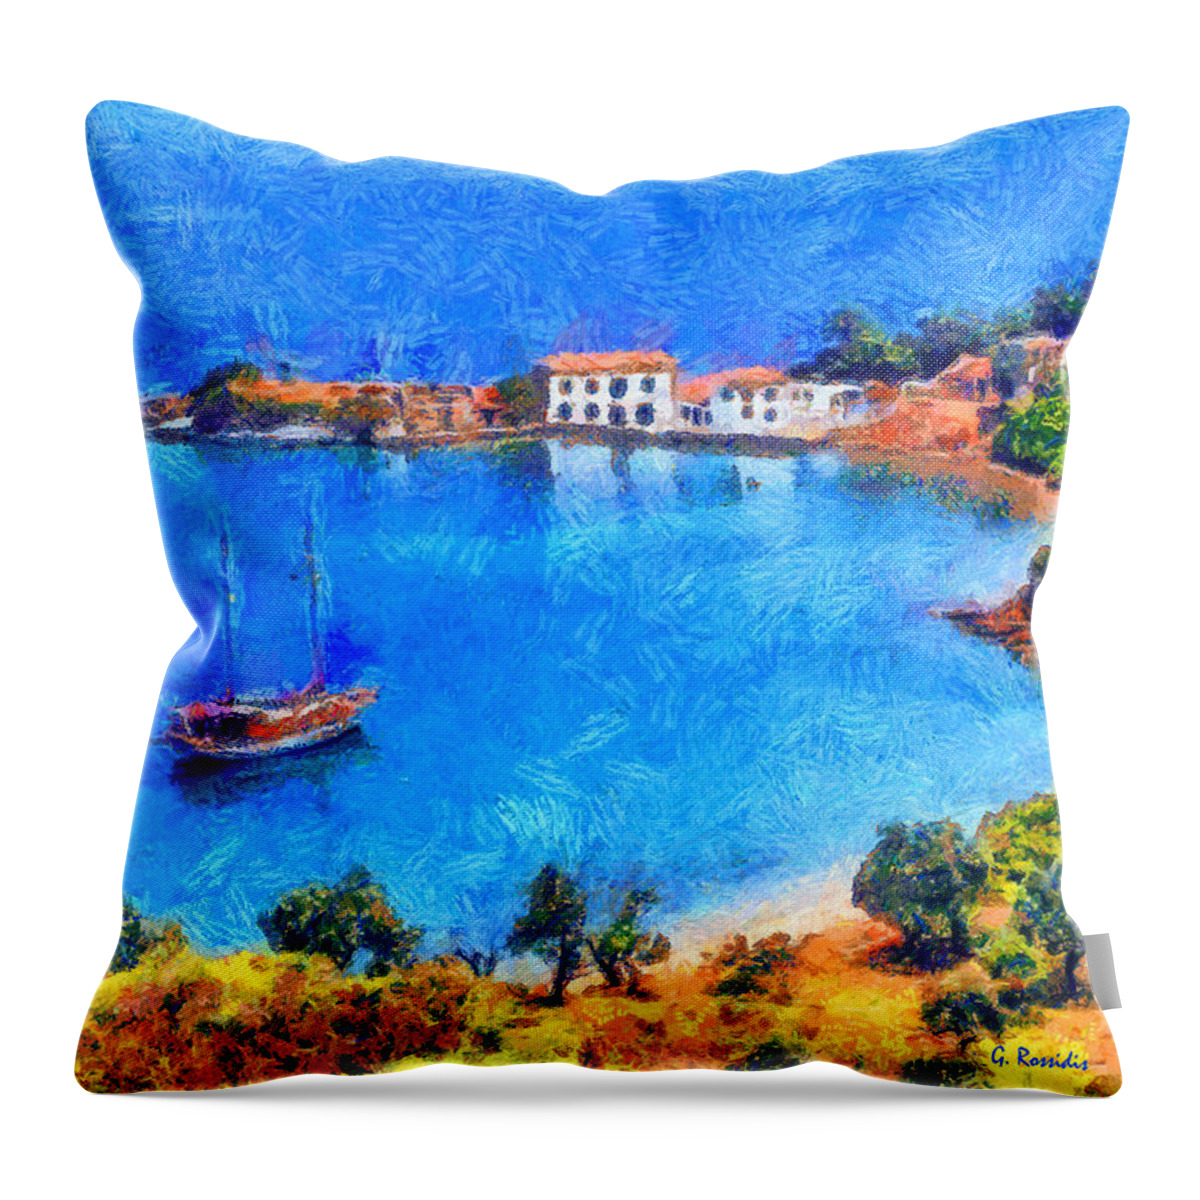 Rossidis Throw Pillow featuring the painting Pelion Tzasteni by George Rossidis